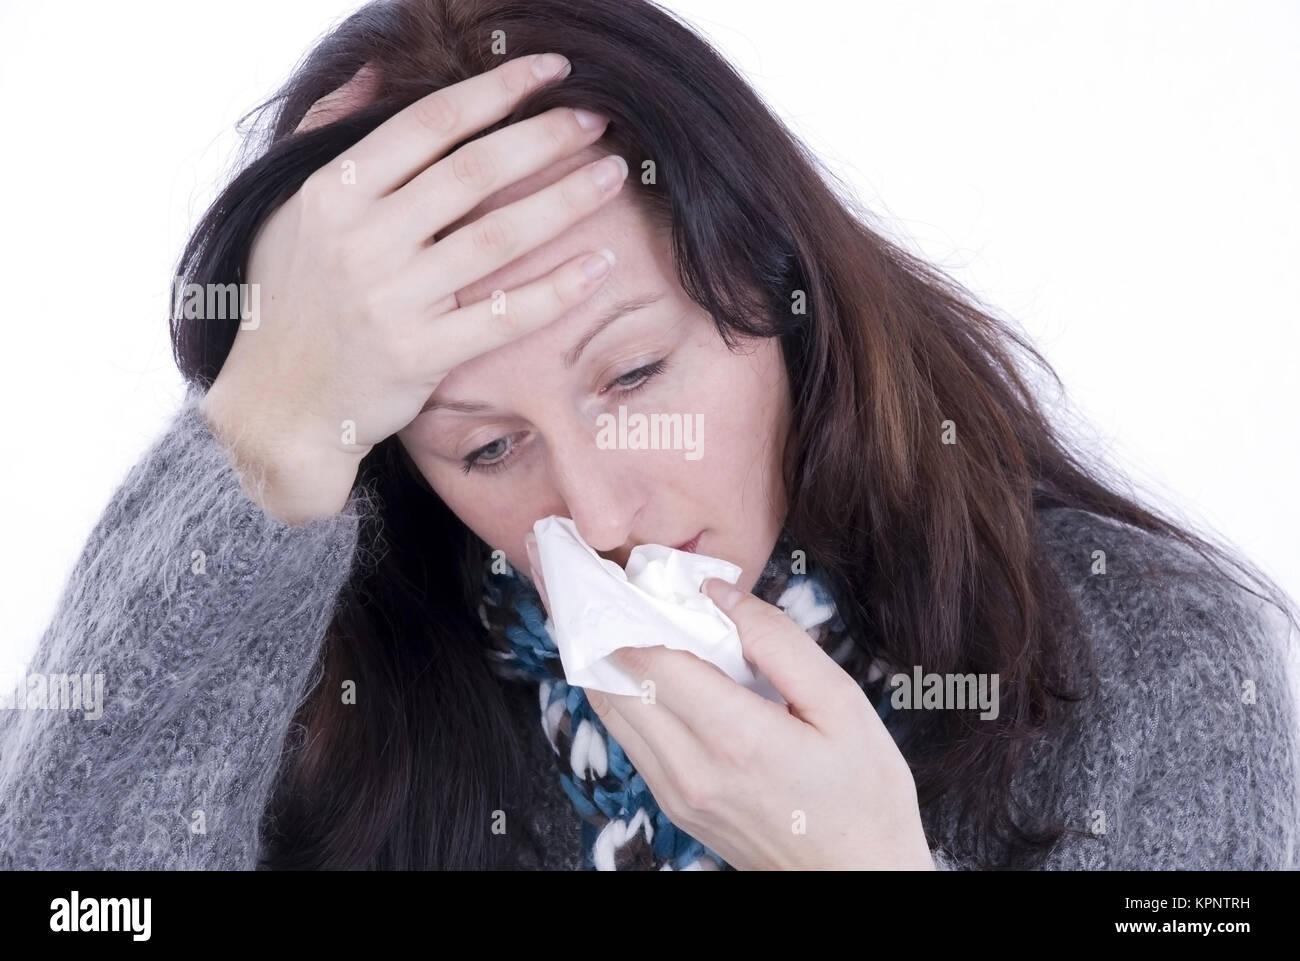 Model release , Junge Frau mit Verkuehlung schneuzt sich - woman with cold Stock Photo